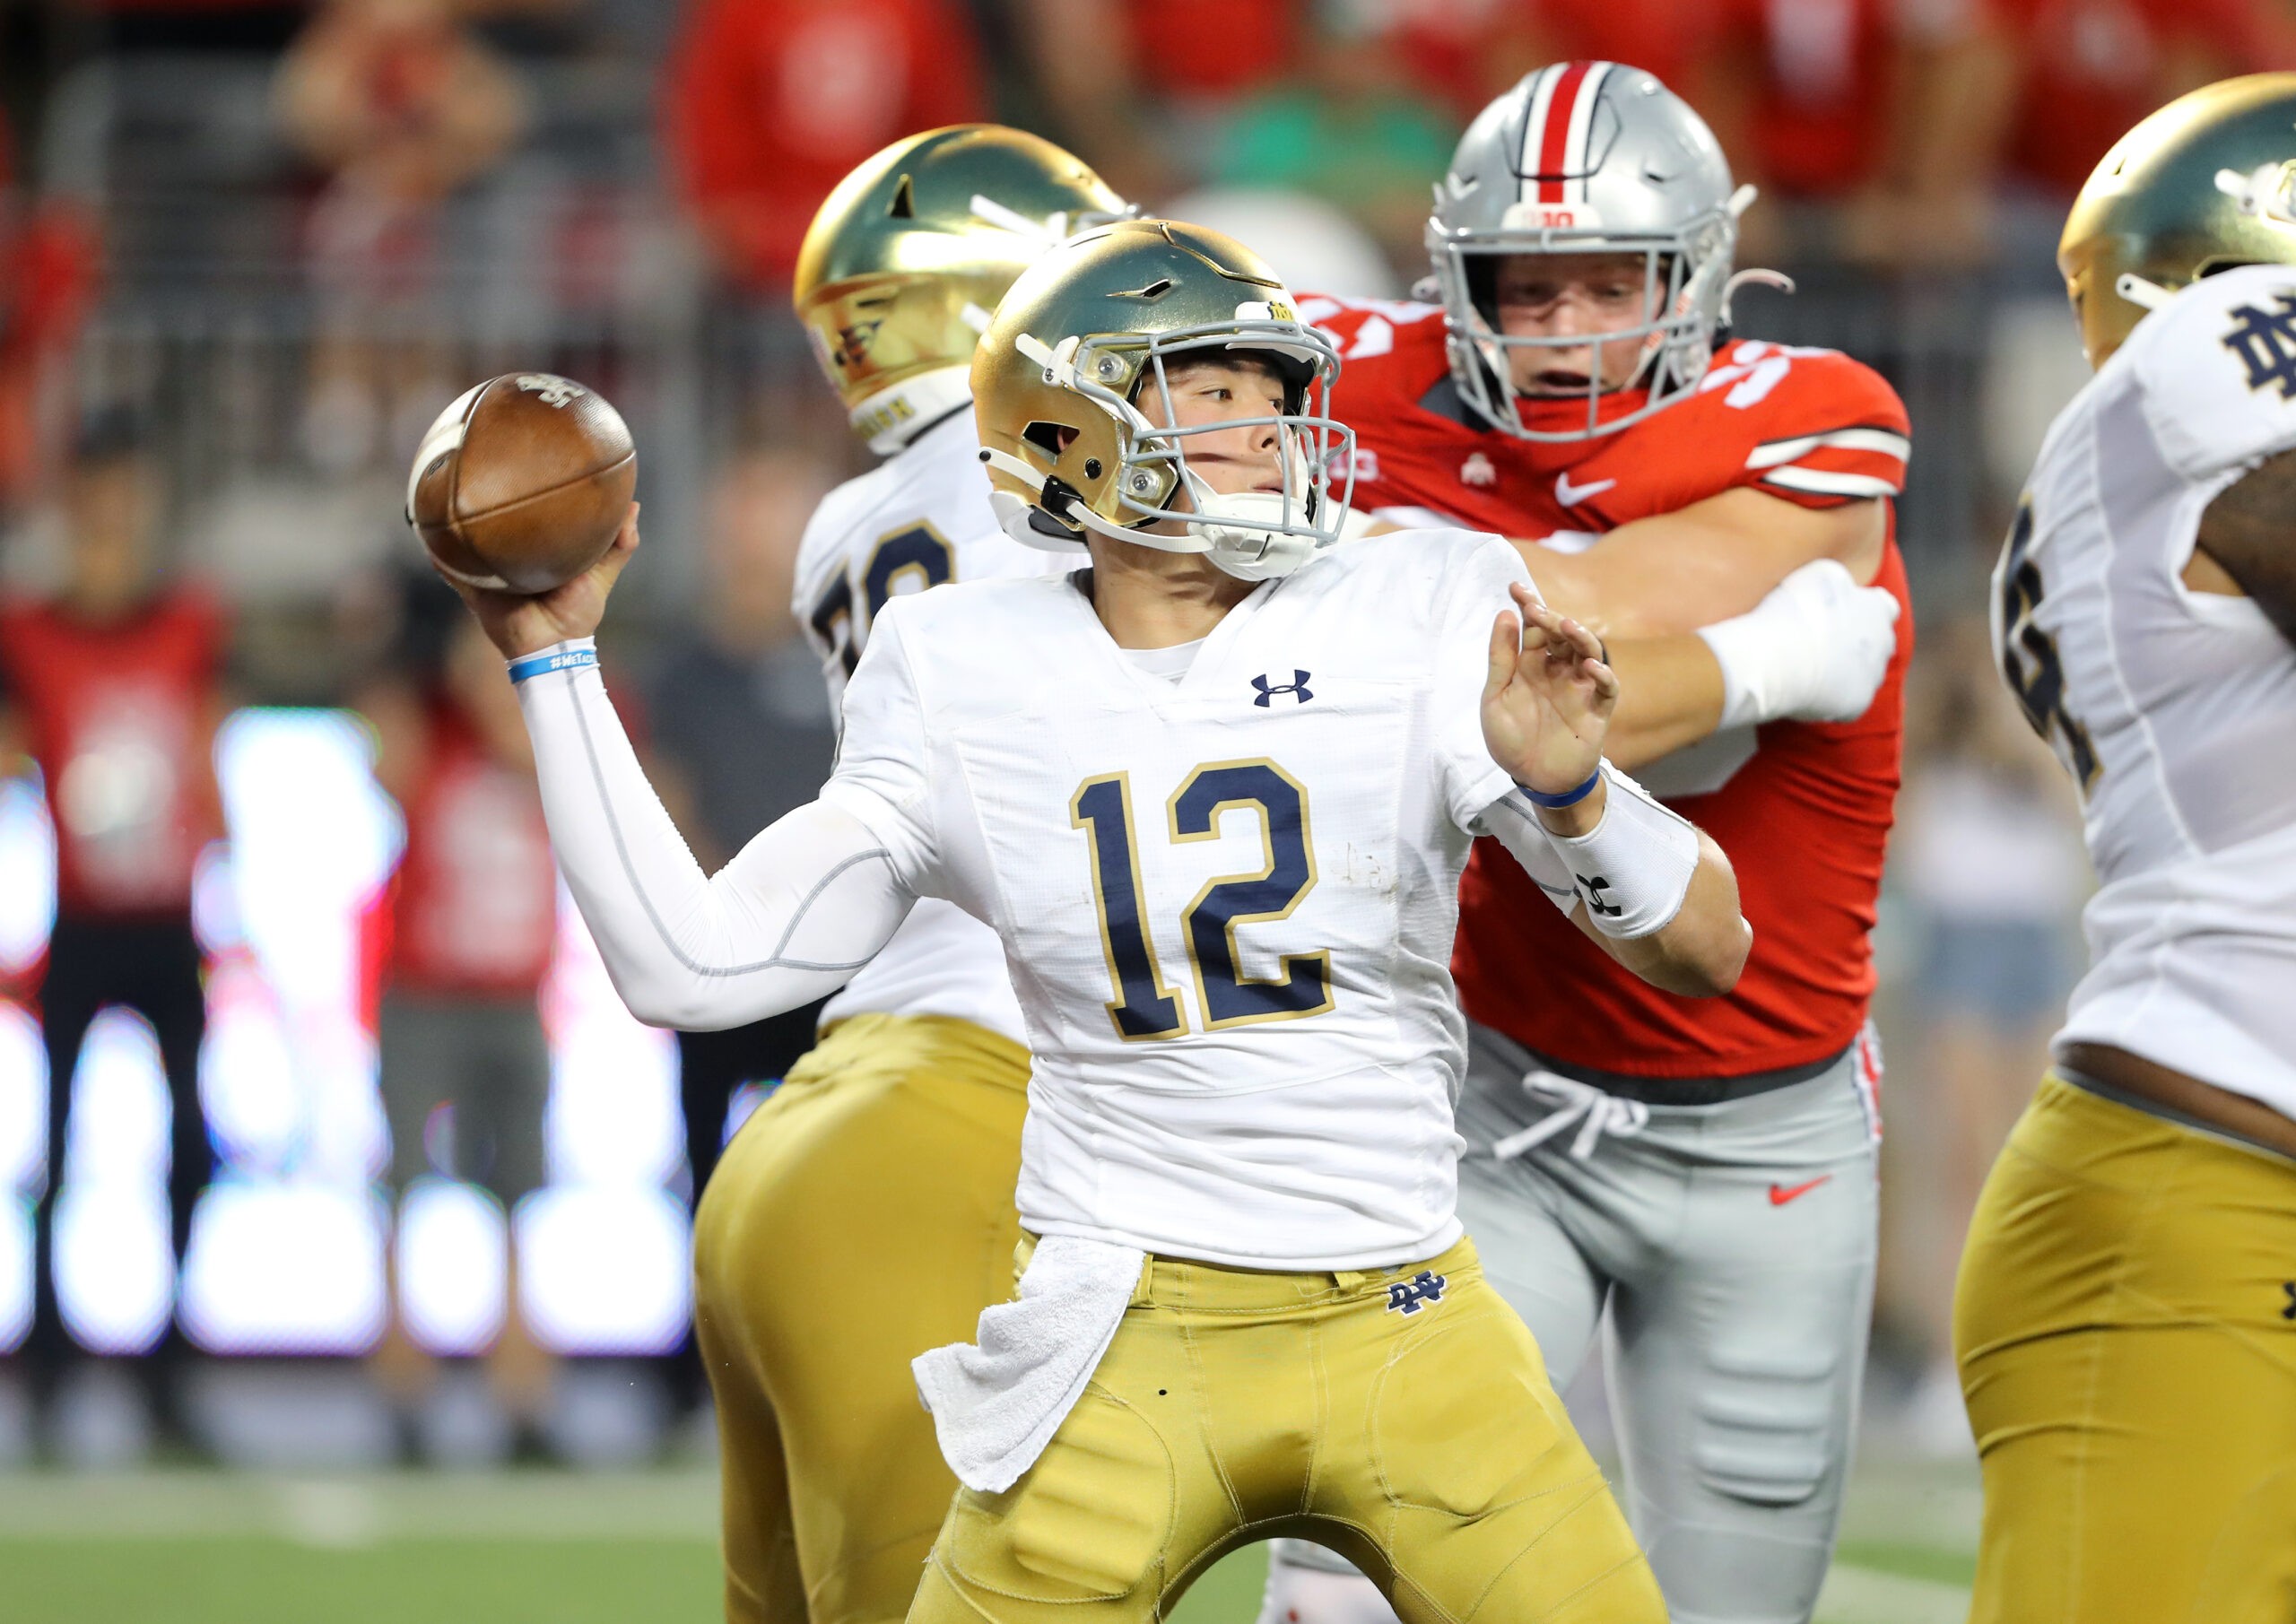 Reactions to Notre Dame’s first half performance against Ohio State